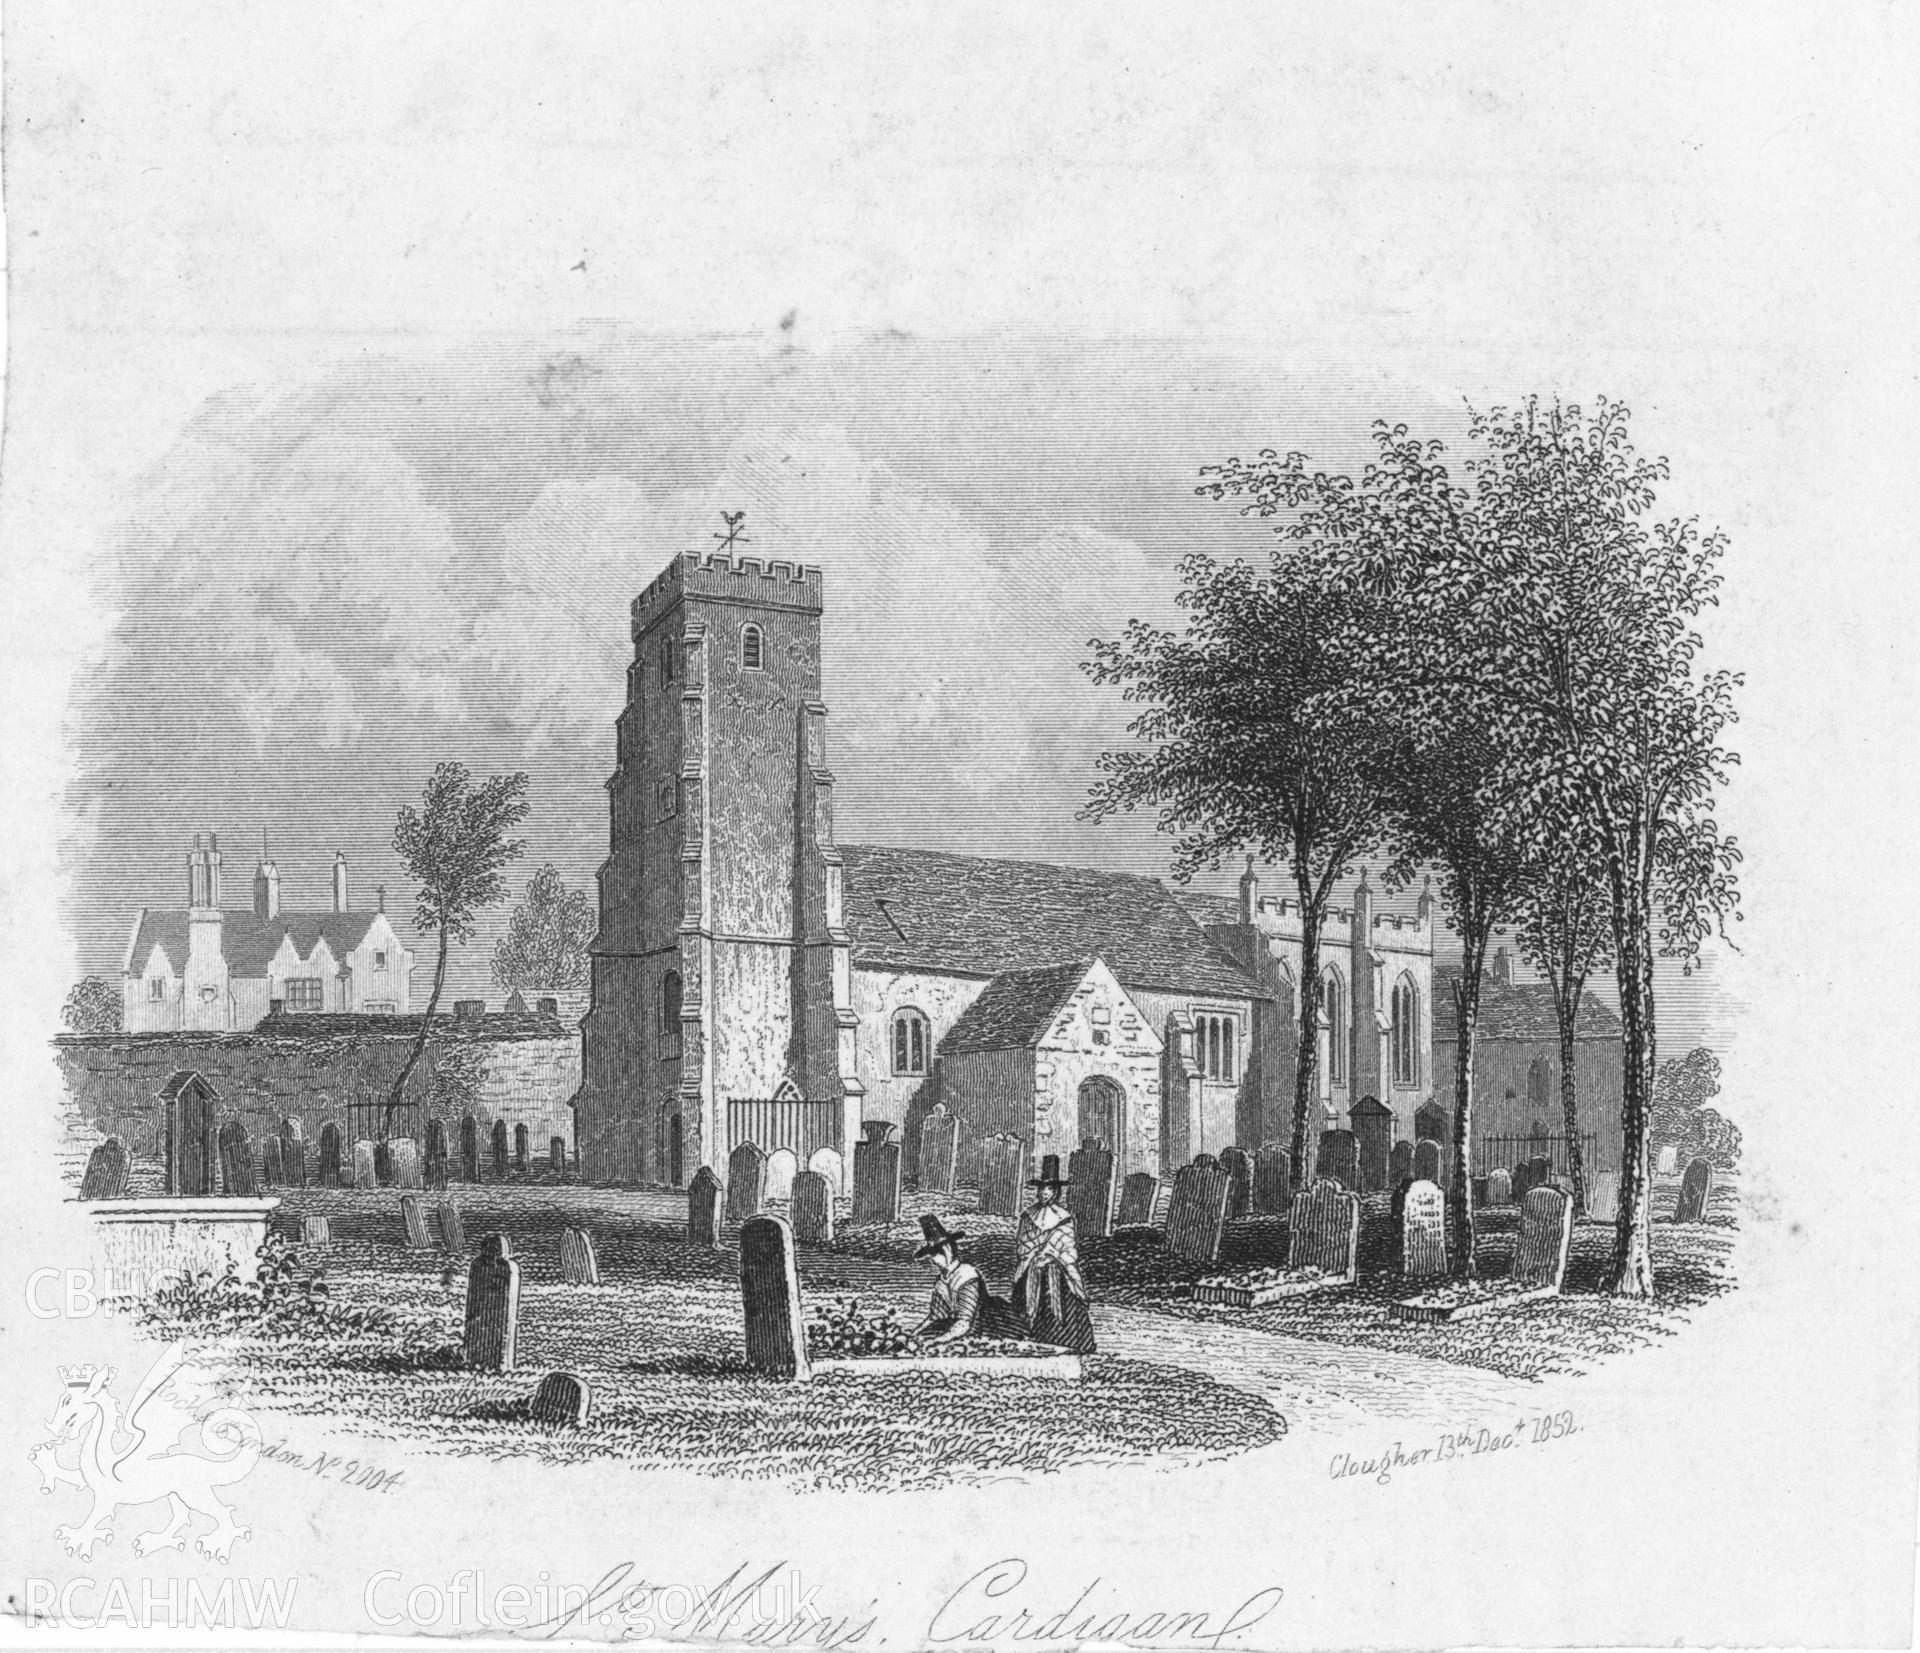 Digital copy of a black and white etching of St Mary's Church, Cardigan.